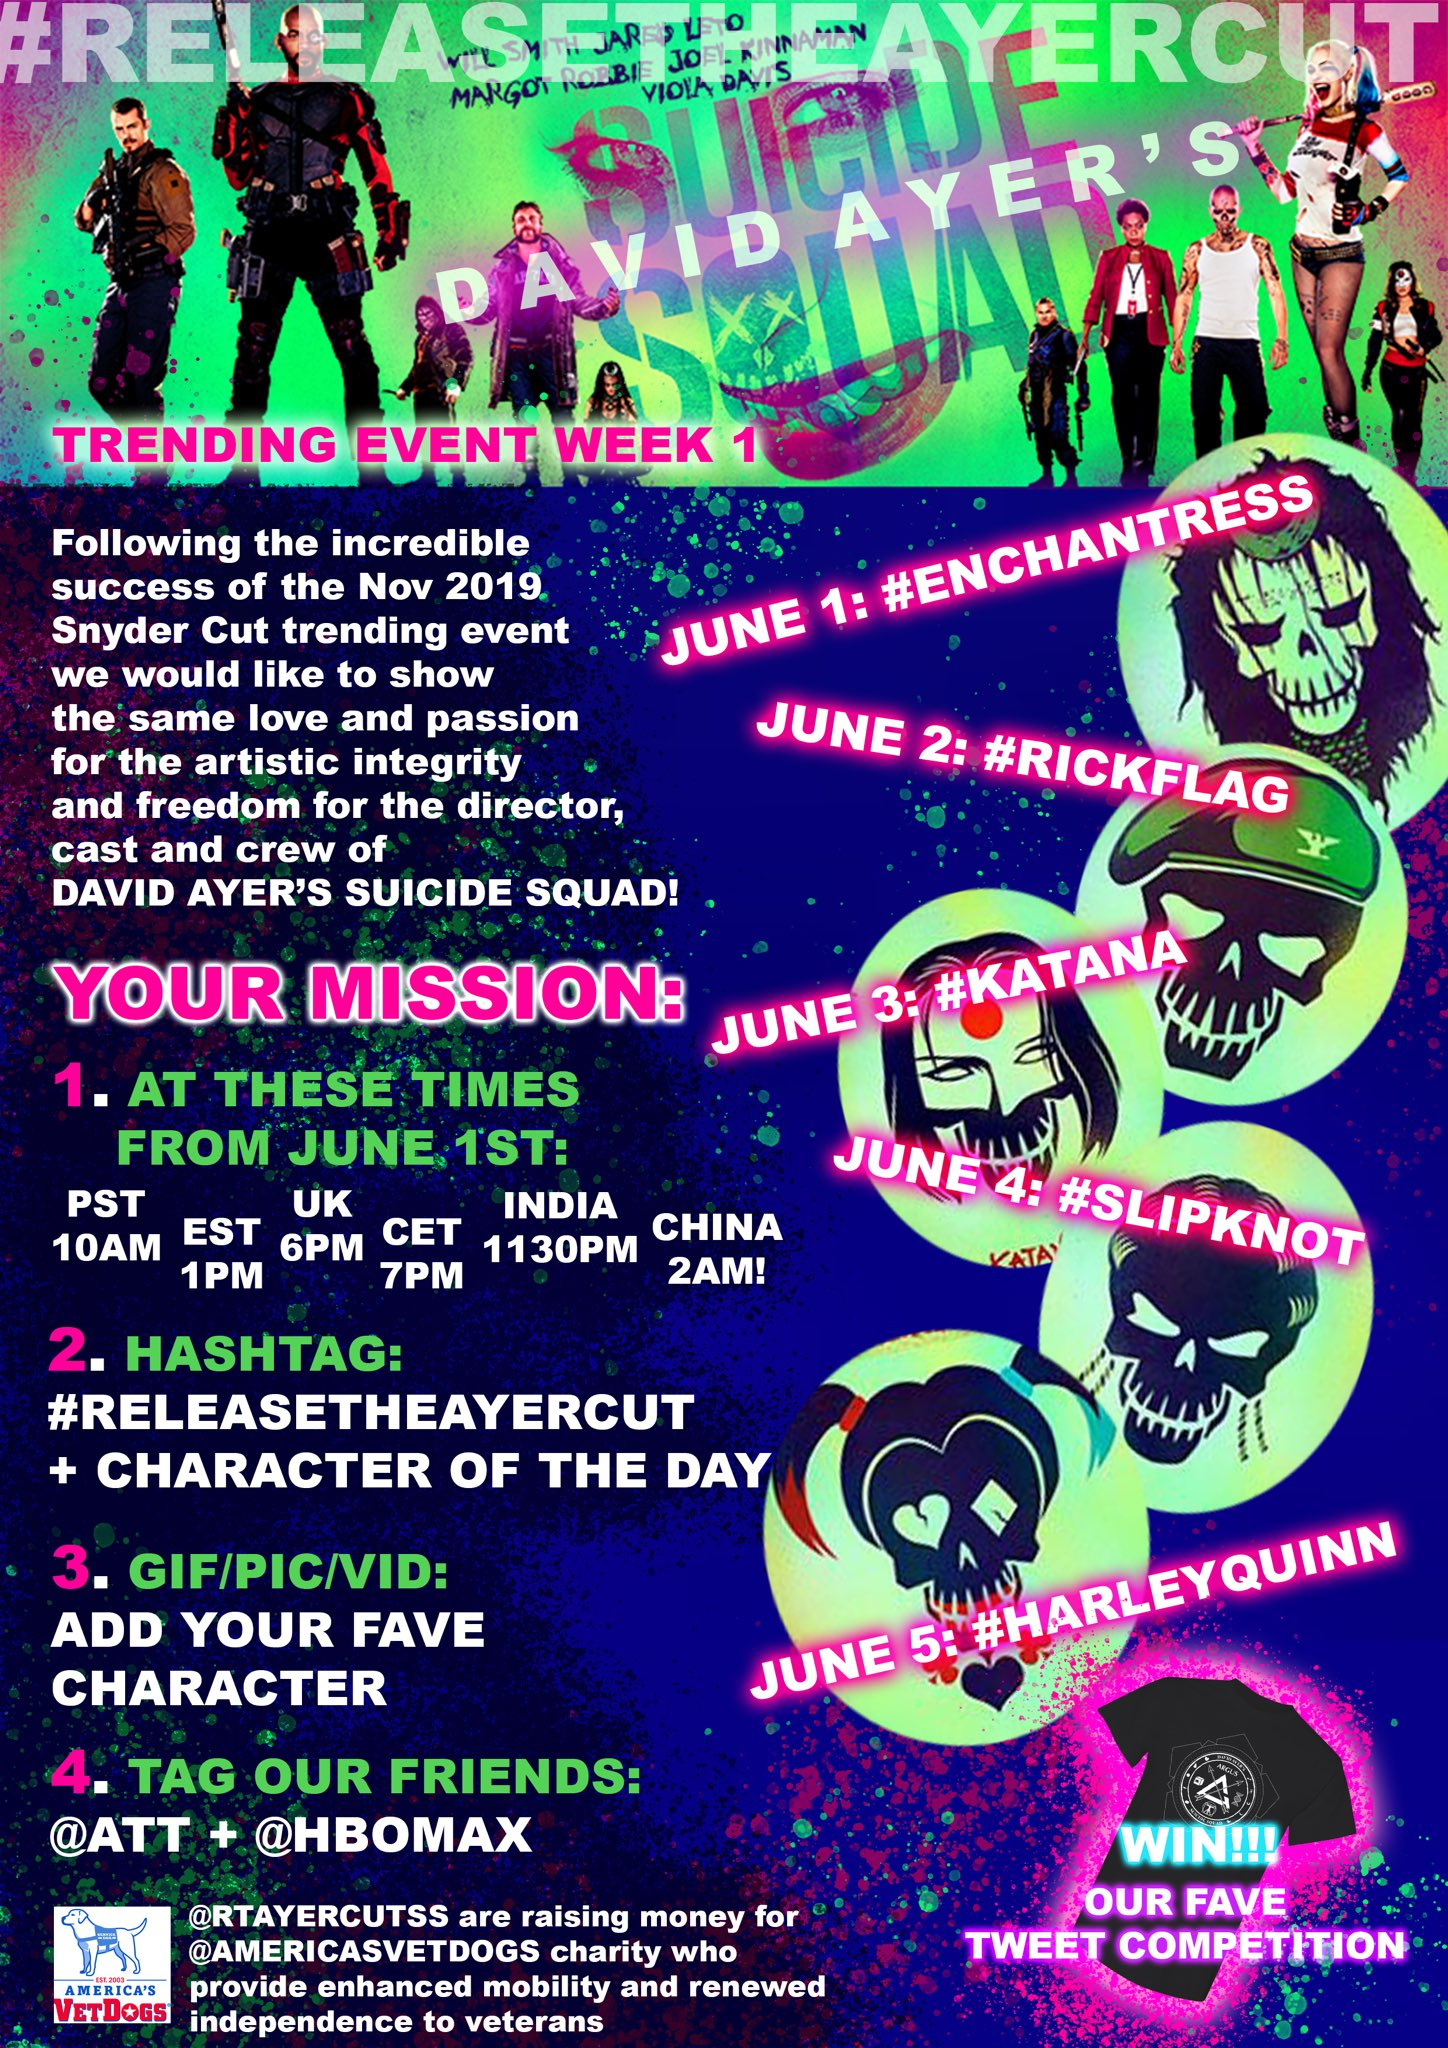 Suicide Squad - Release The Ayer Cut - Twitter Event for June 2020